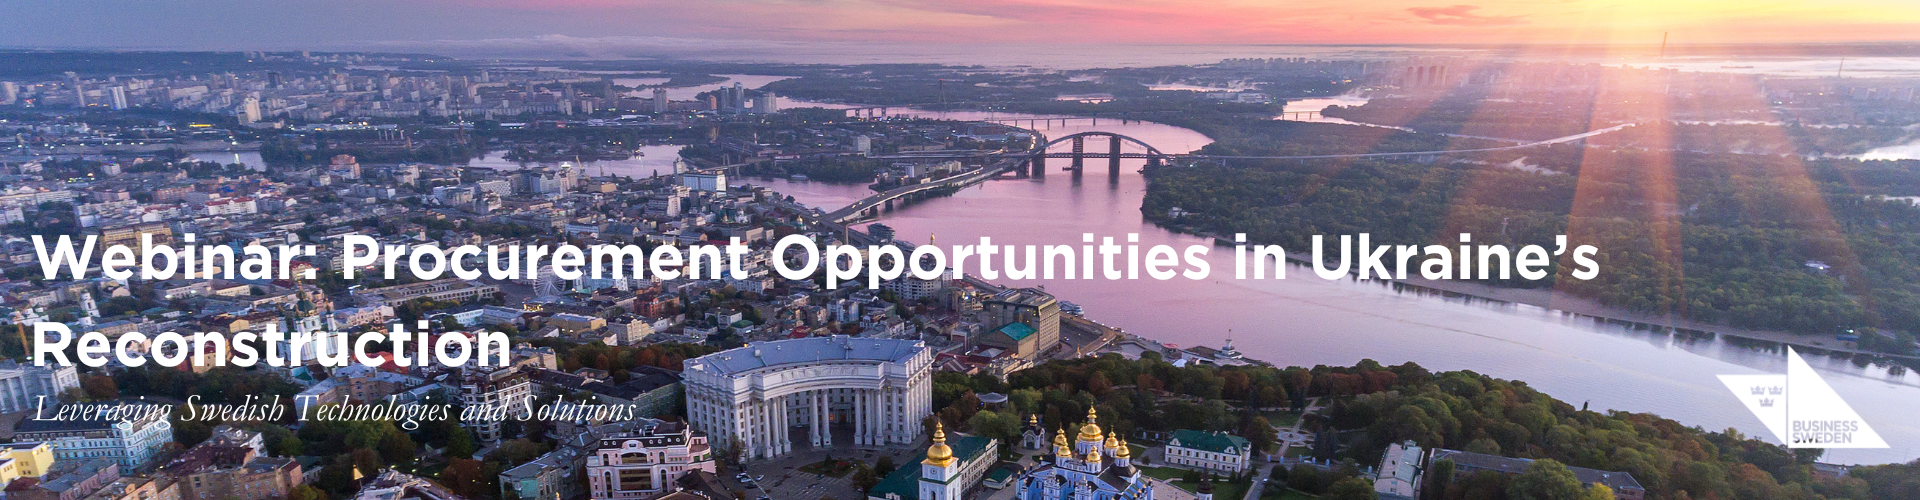 Header image for Procurement Opportunities in Ukraine’s Reconstruction: Leveraging Swedish Technologies and Solutions